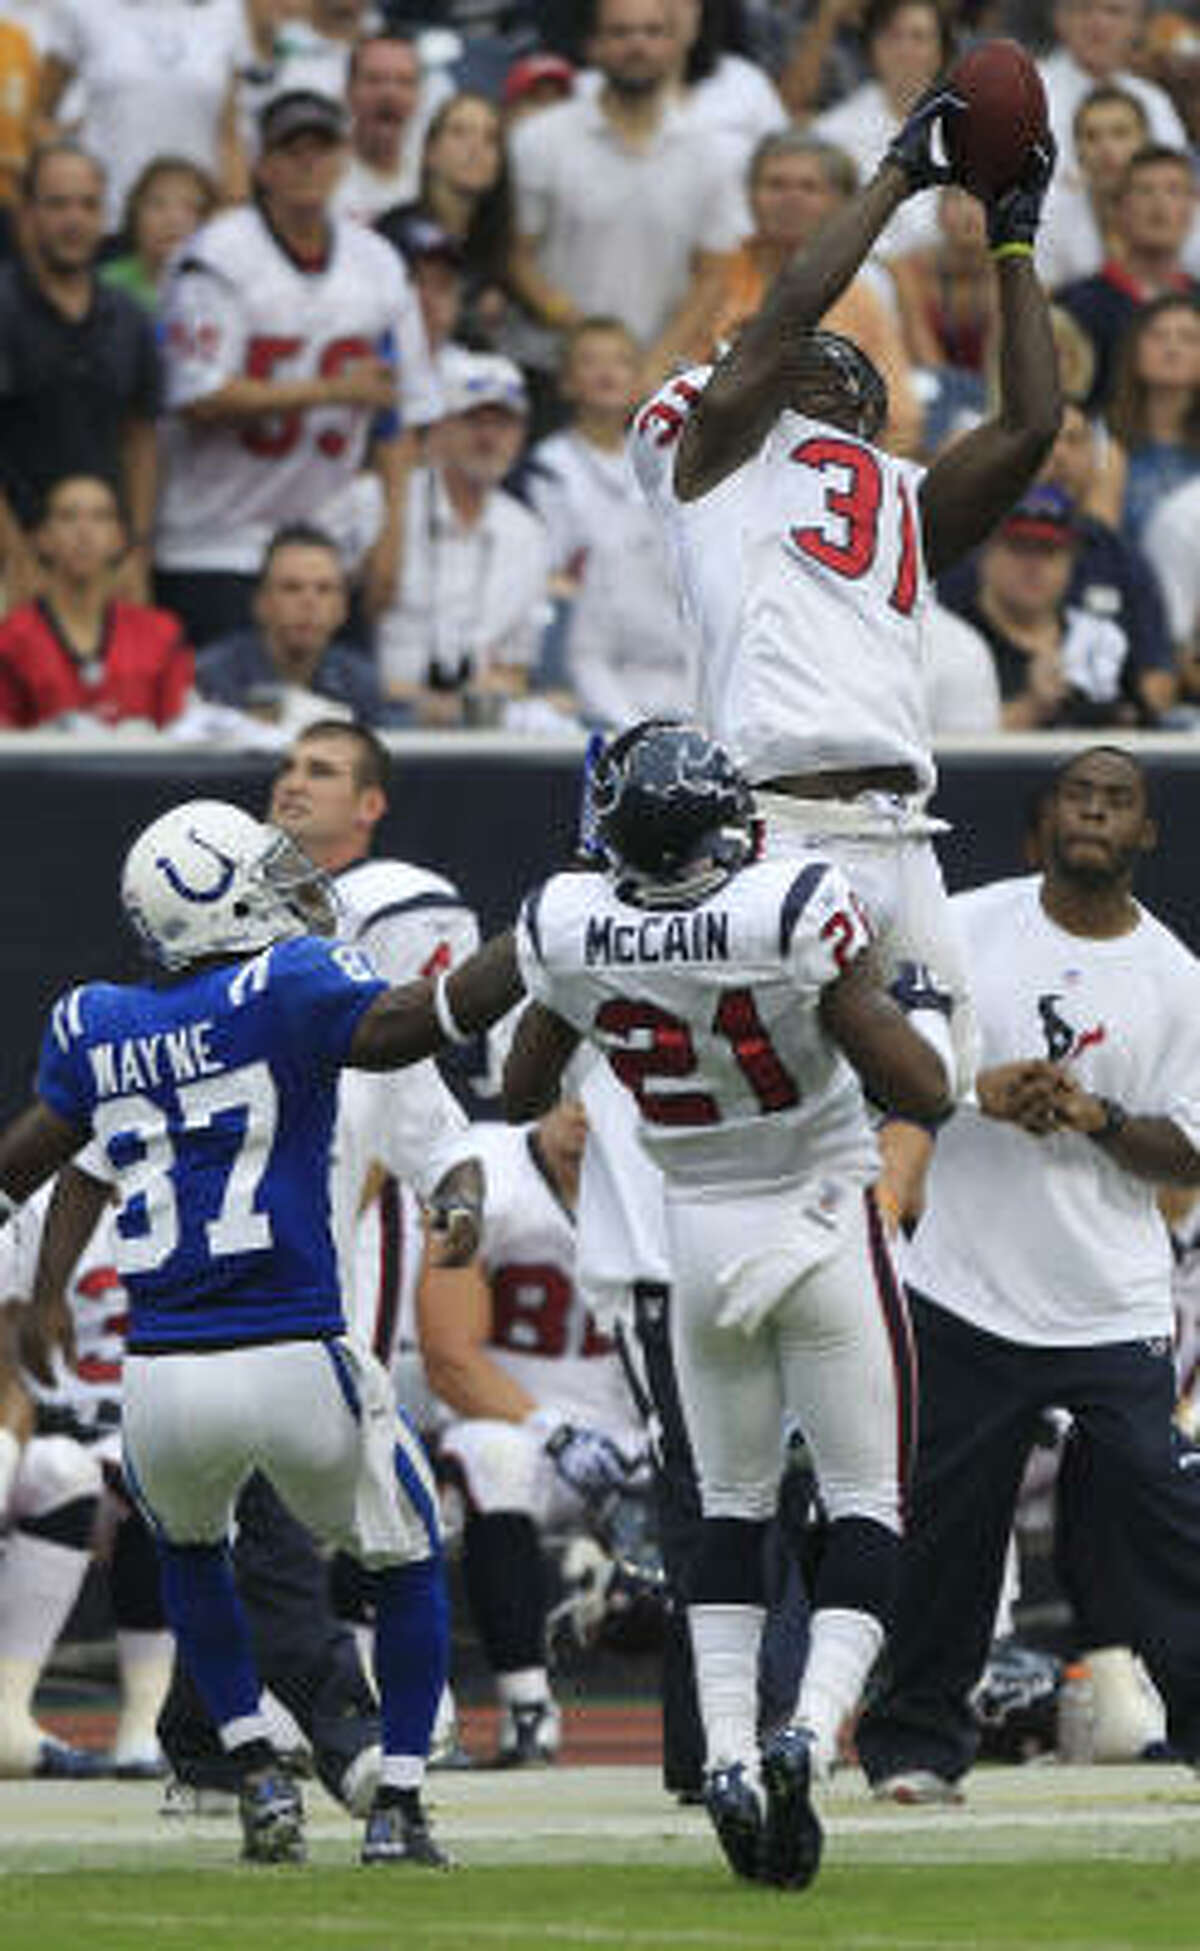 Texans safety Bernard Pollard will face his former organization for the first time on Sunday.